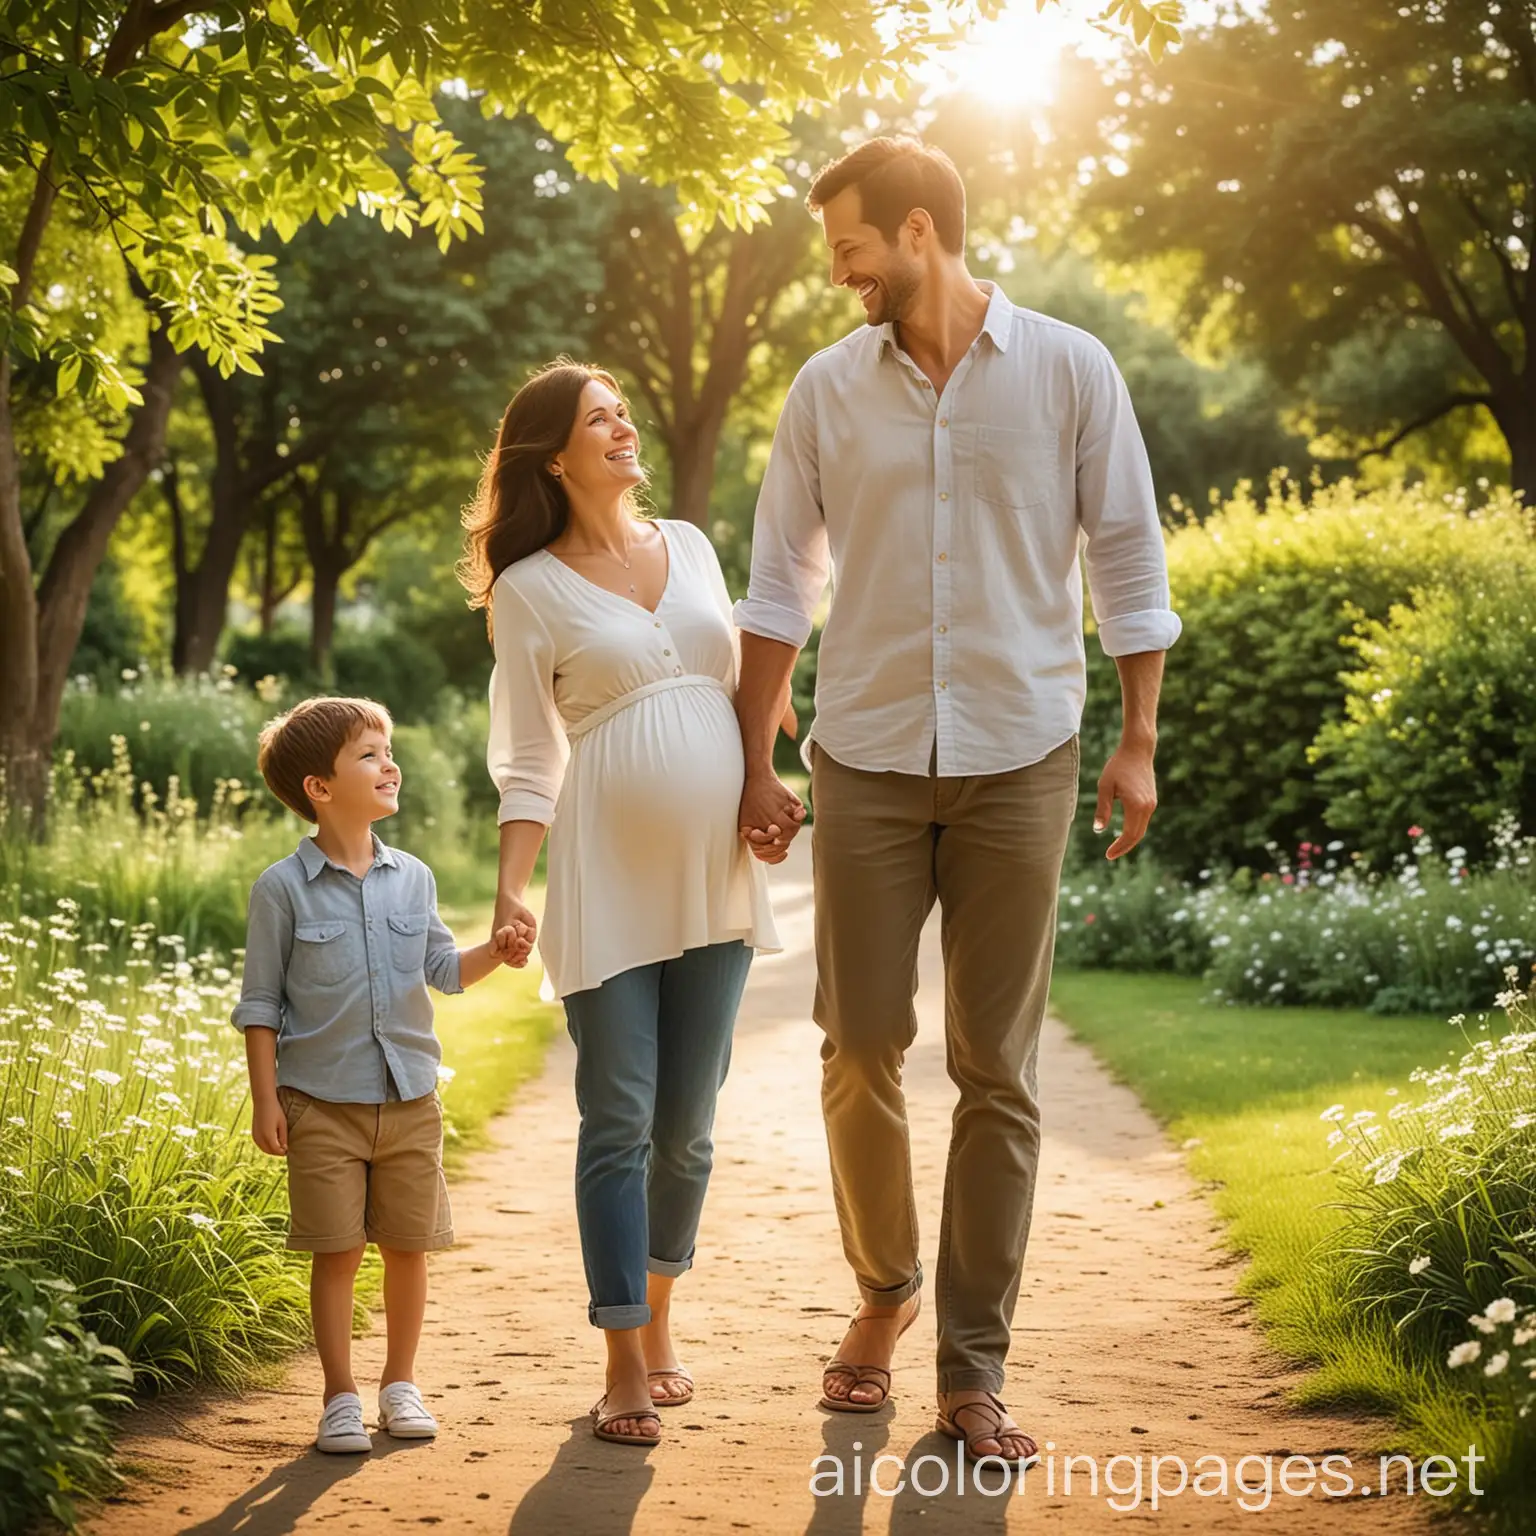 Radiant-Pregnant-Woman-Holds-Hands-with-Husband-and-Grandson-in-Summer-Park